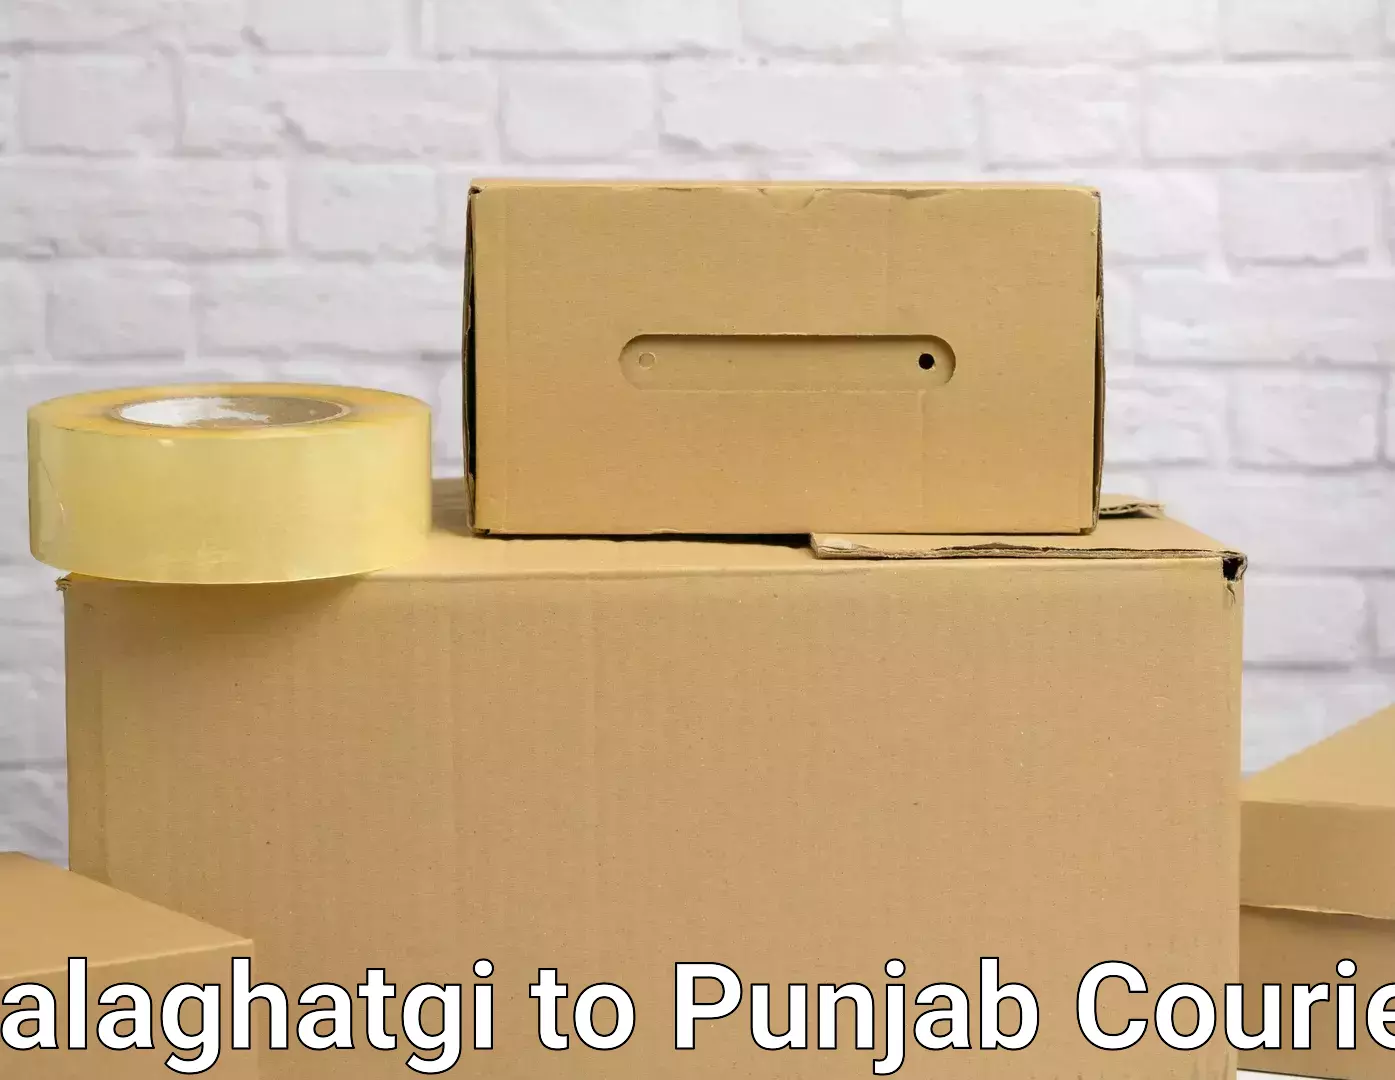 Moving and packing experts in Kalaghatgi to Mohali